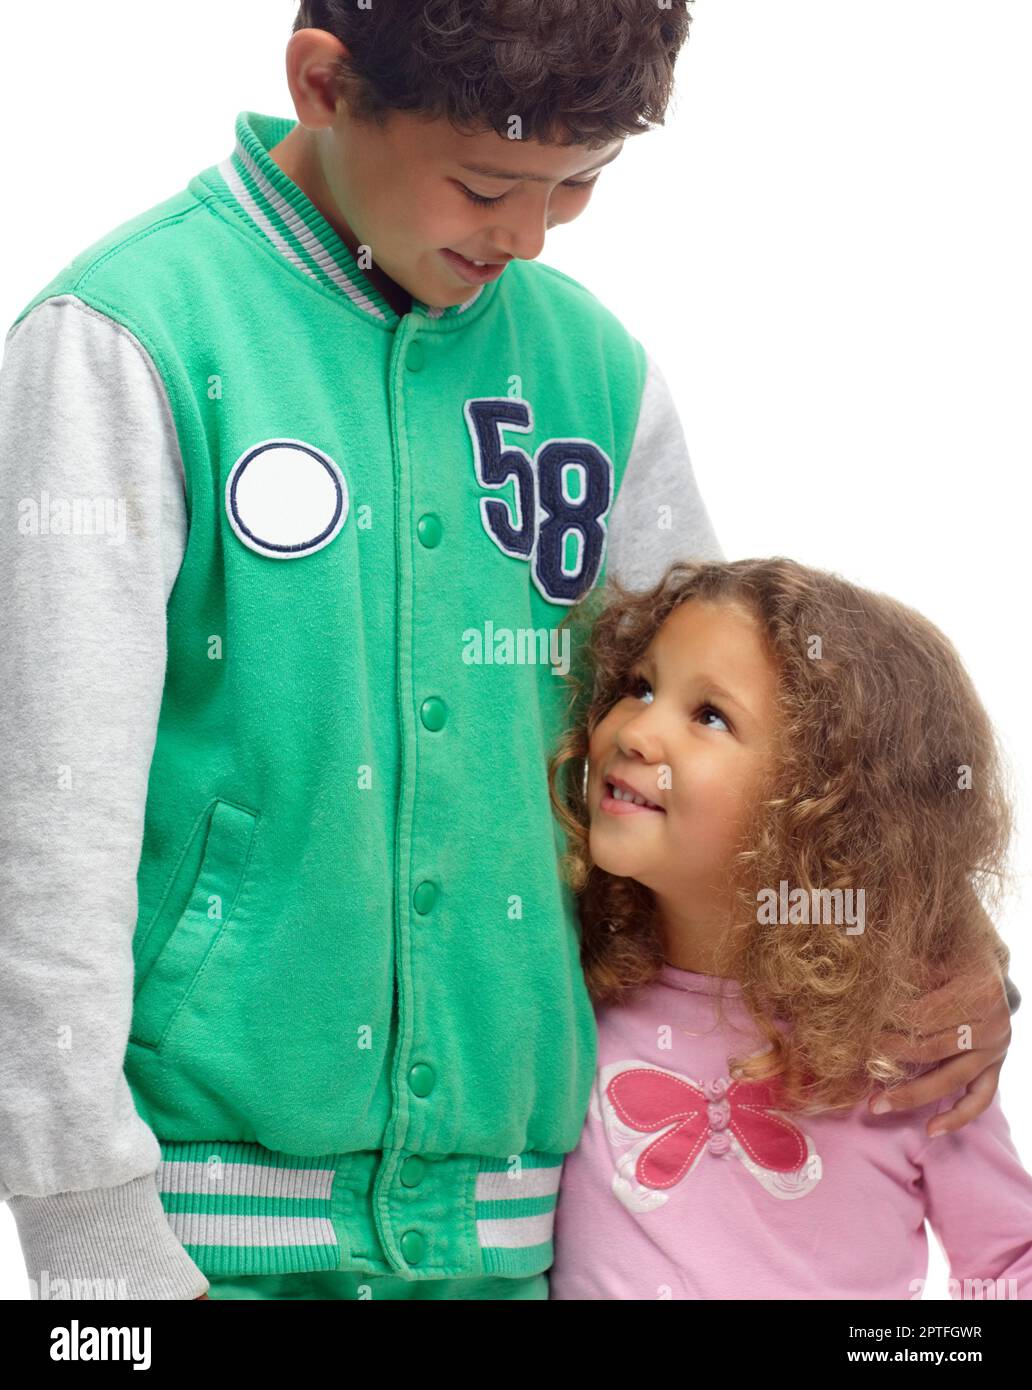 Hes her big brother. Cute siblings standing together and smiling Stock Photo